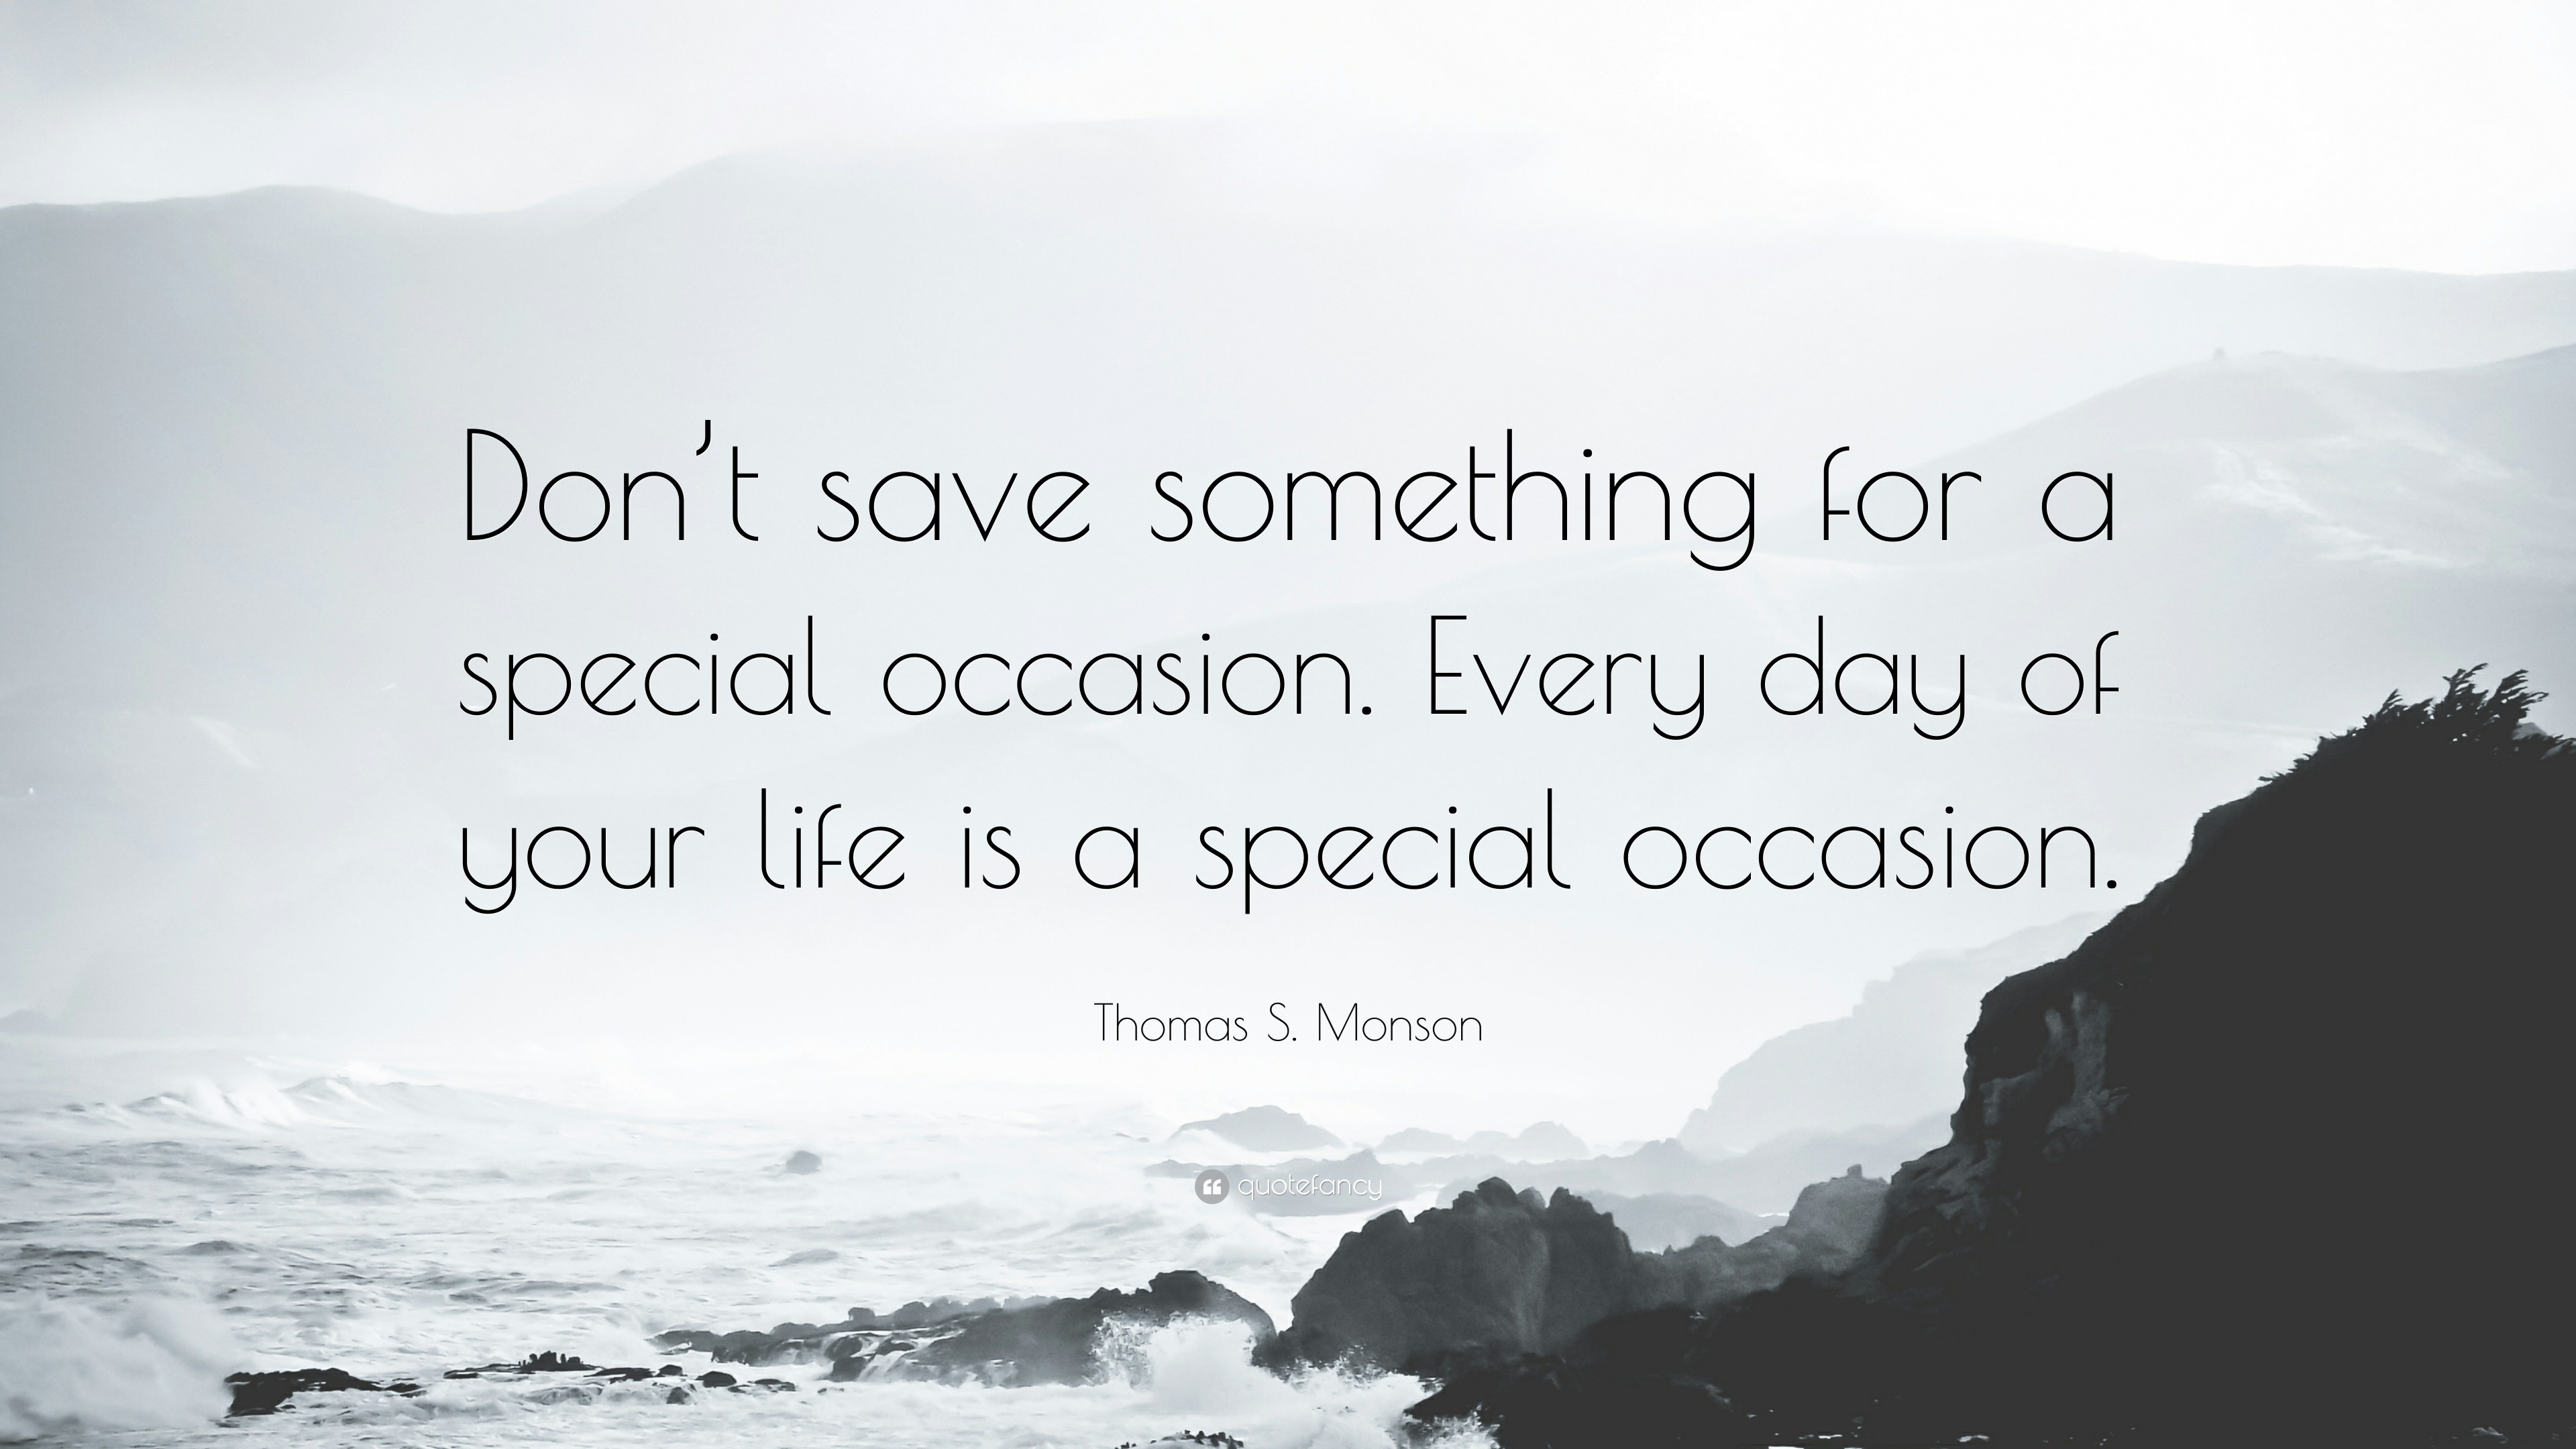 Thomas S. Monson Quote: “Don’t save something for a special occasion